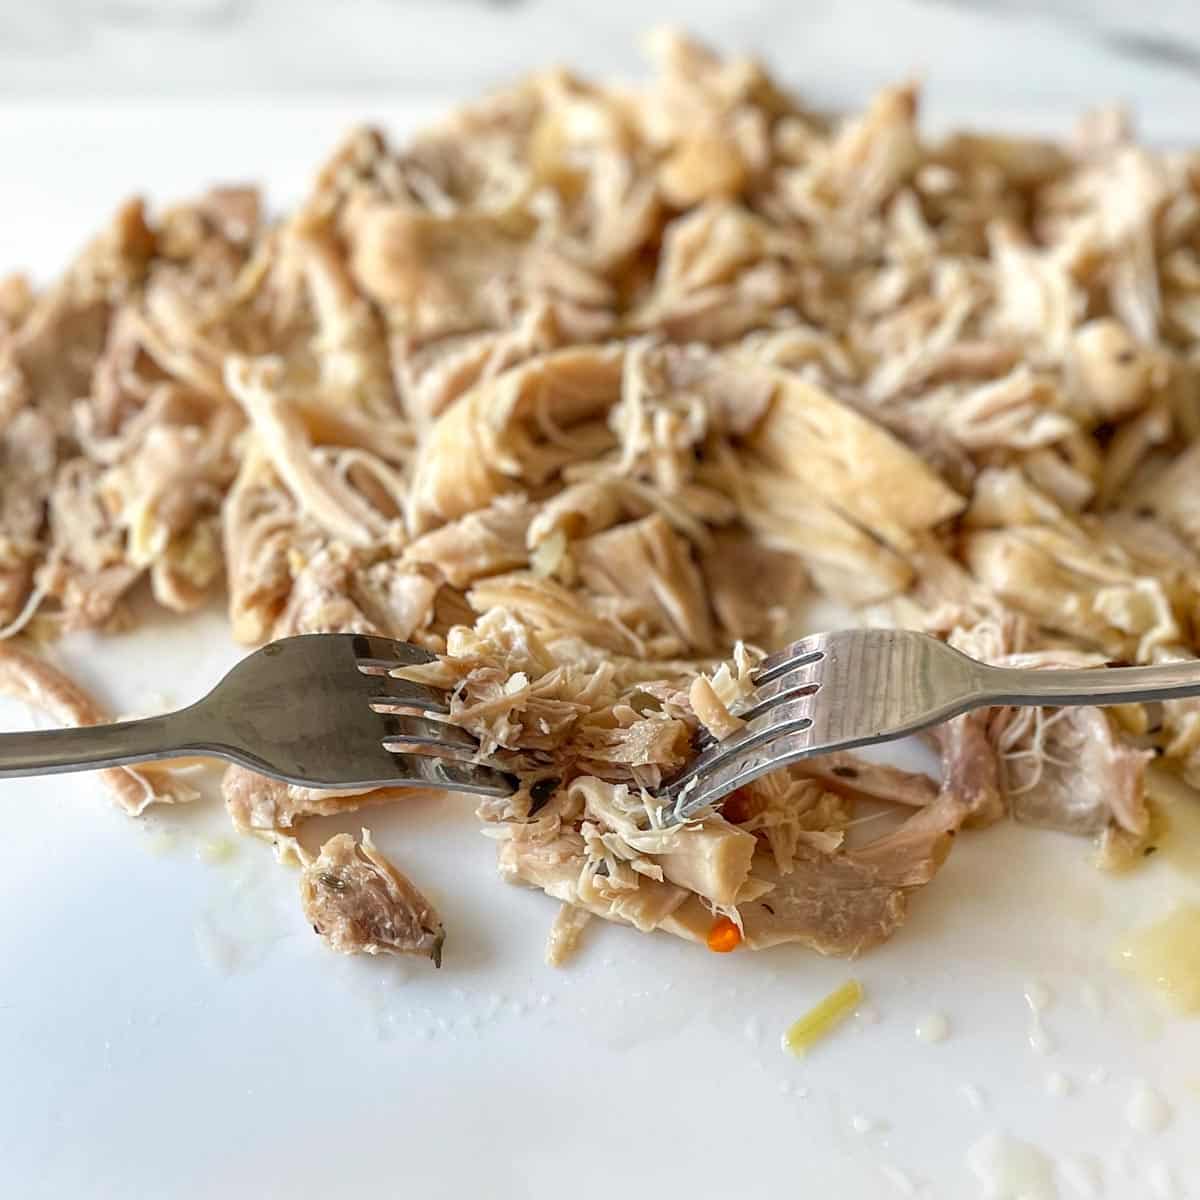 Chicken thighs are shredded with two forks.